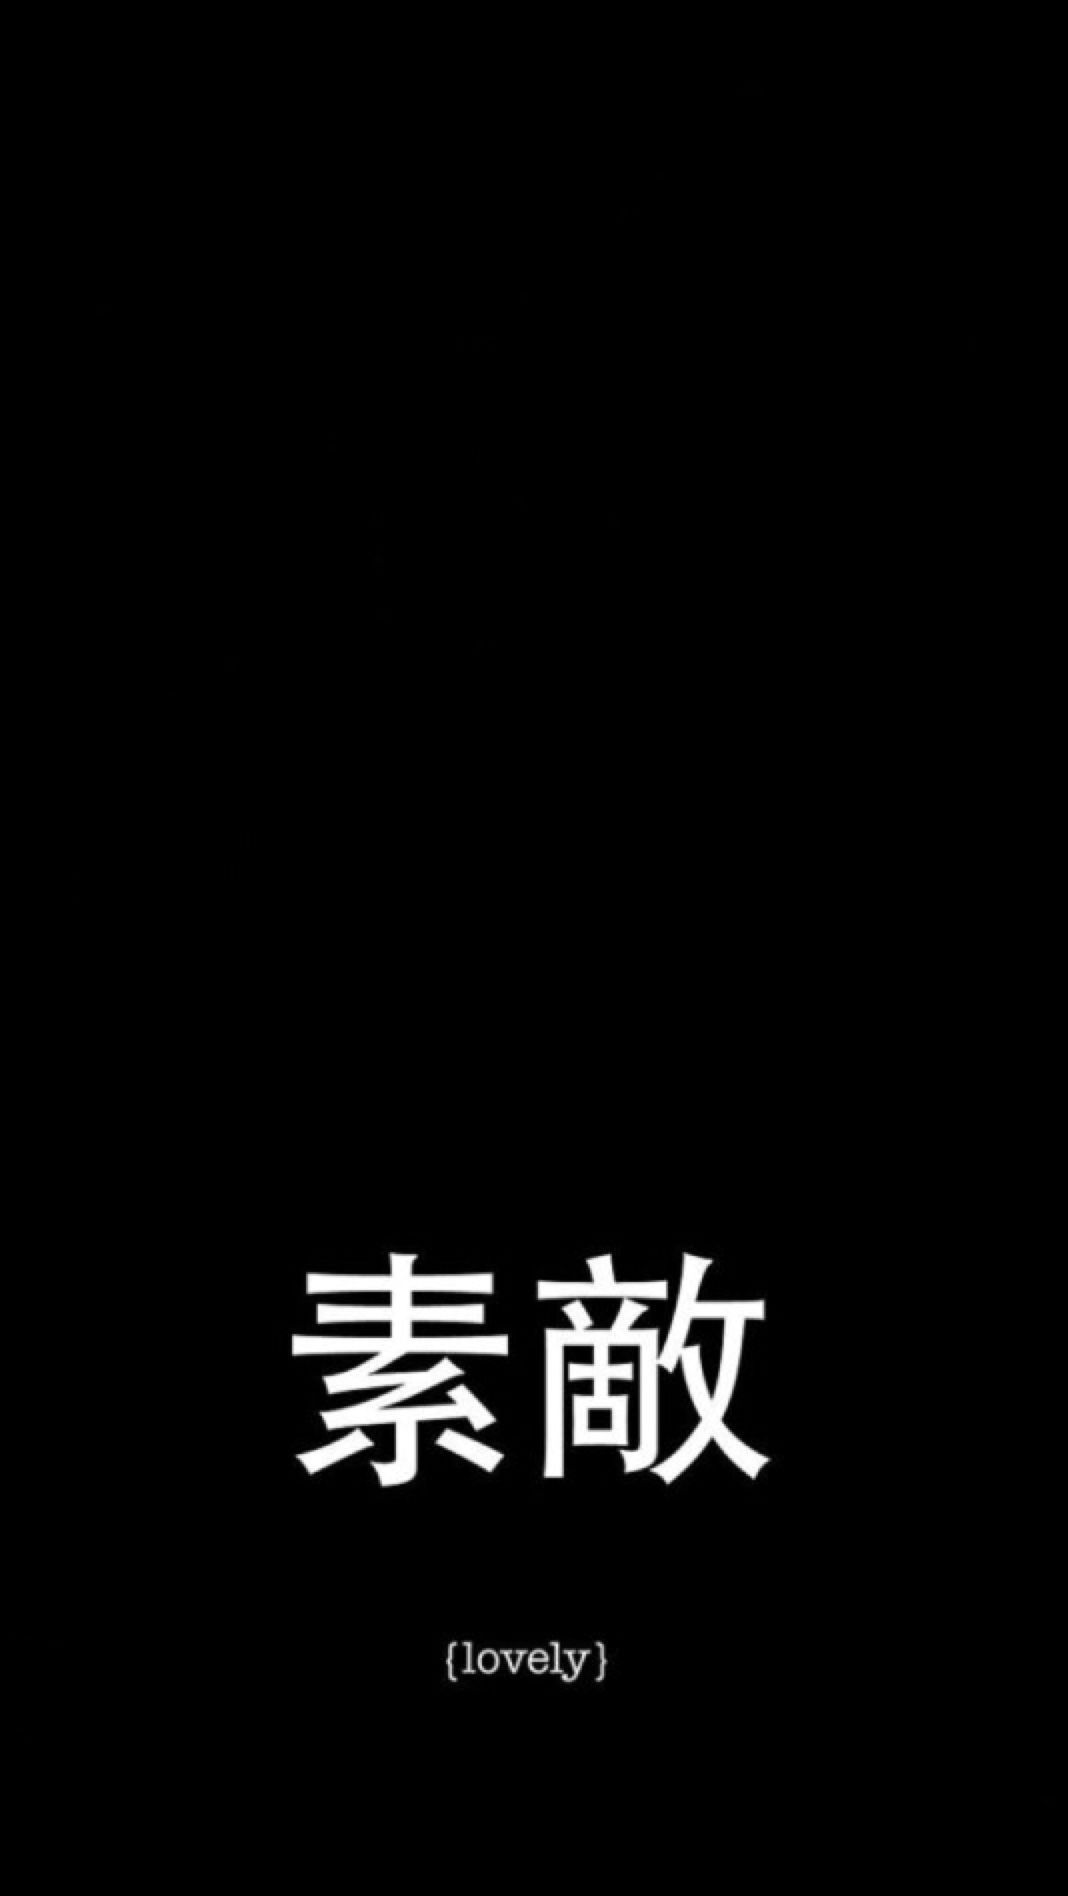 A black background with the word 